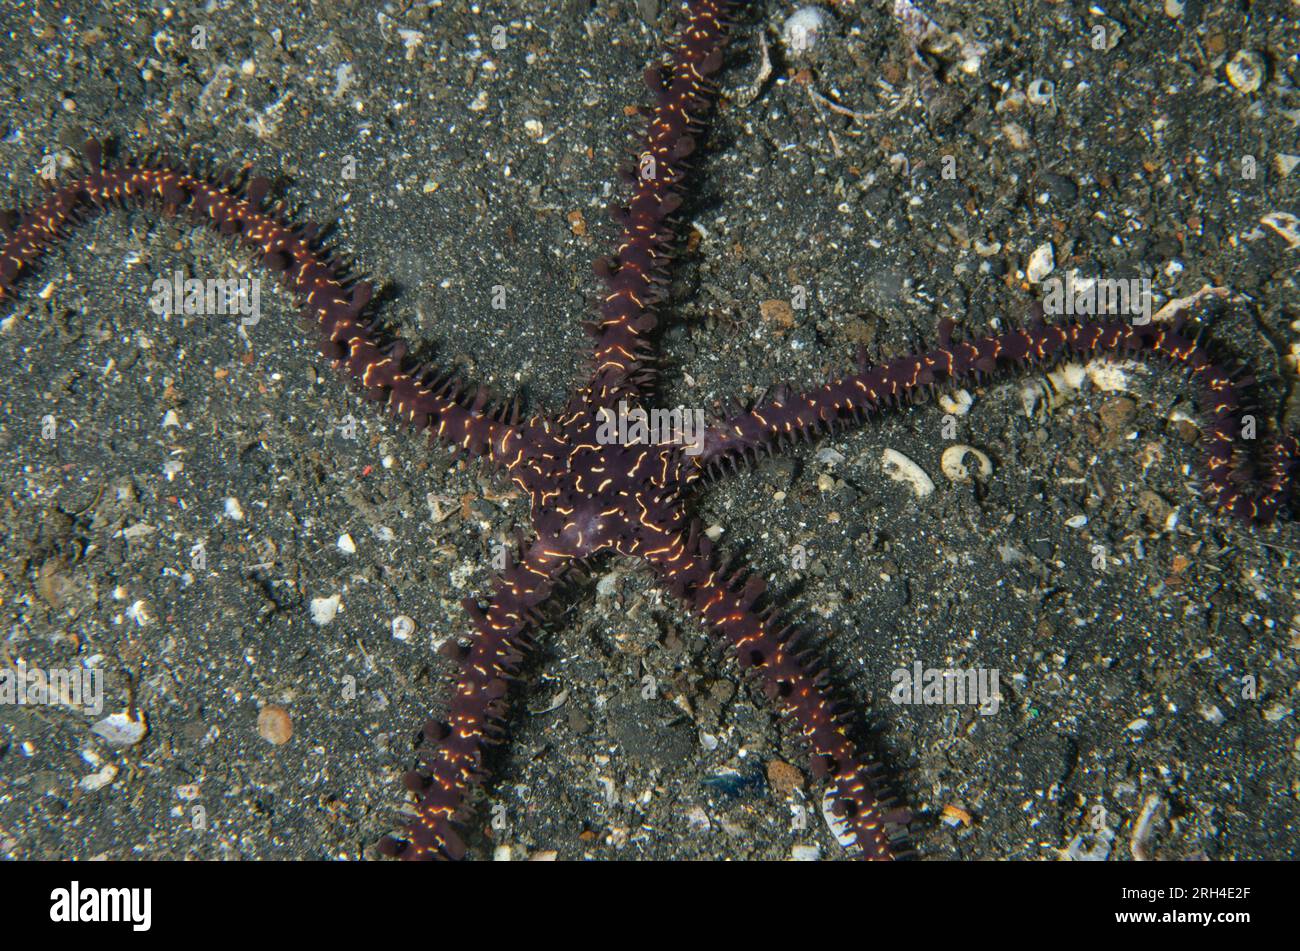 Variable Brittle Star, Ophiomastix variabilis, on sand, night dive, TK1 dive site, Lembeh Straits, Sulawesi, Indonesia Stock Photo